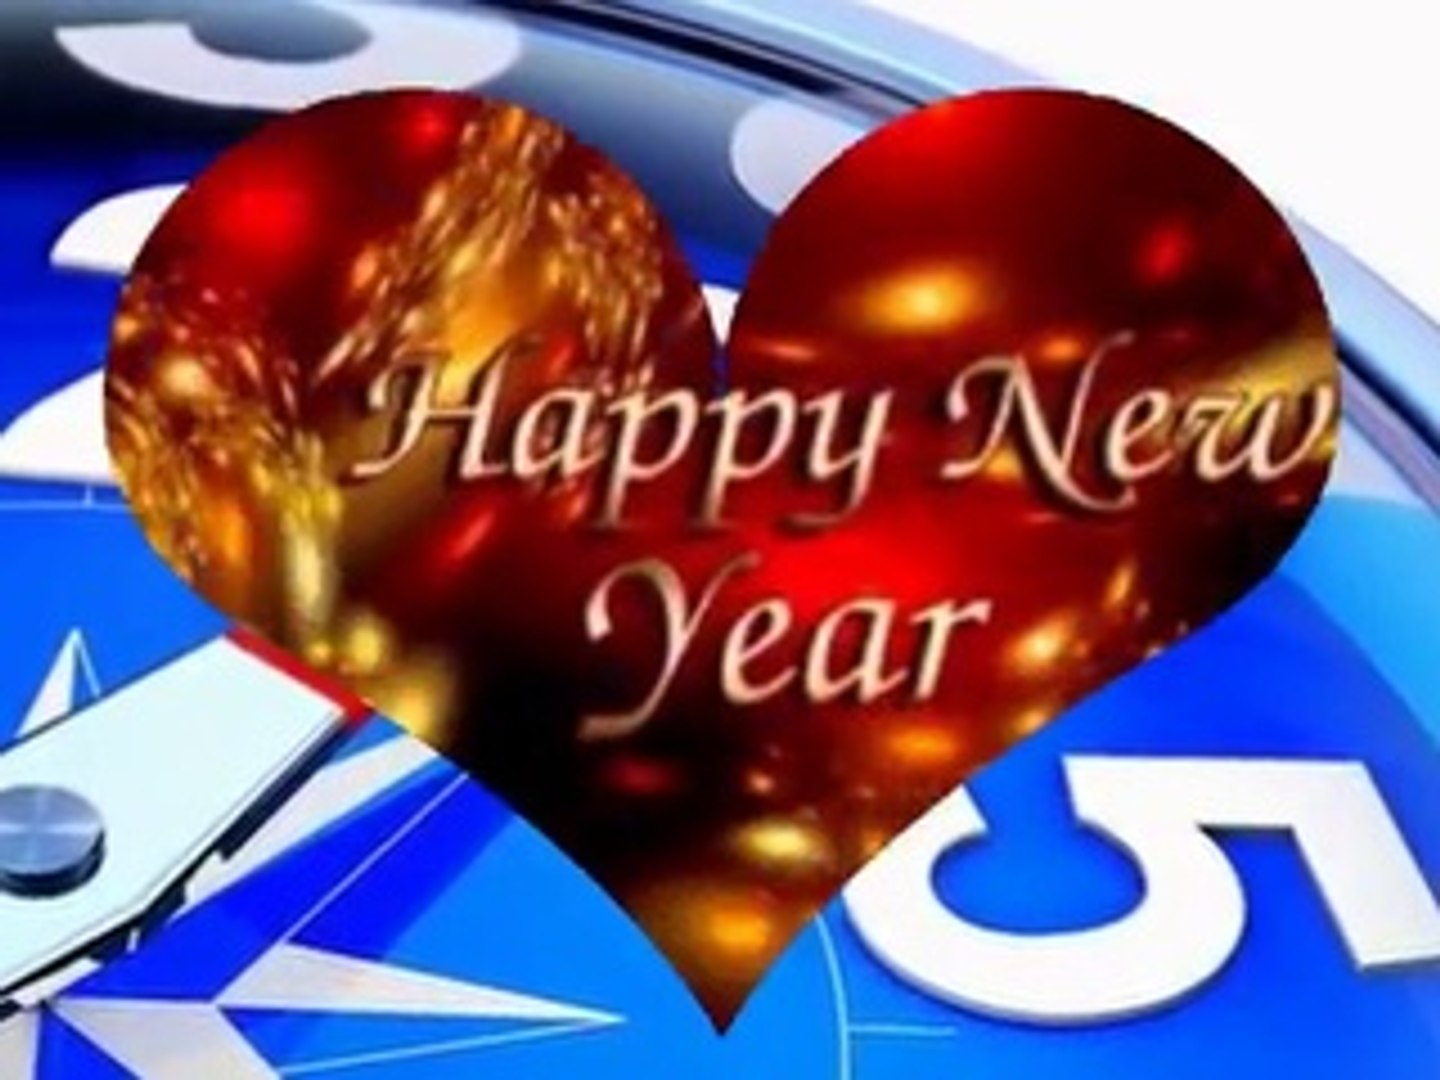 Download New Year 2015 Whatsapp Video 1st January 2015 - Advance Happy New Year Card , HD Wallpaper & Backgrounds